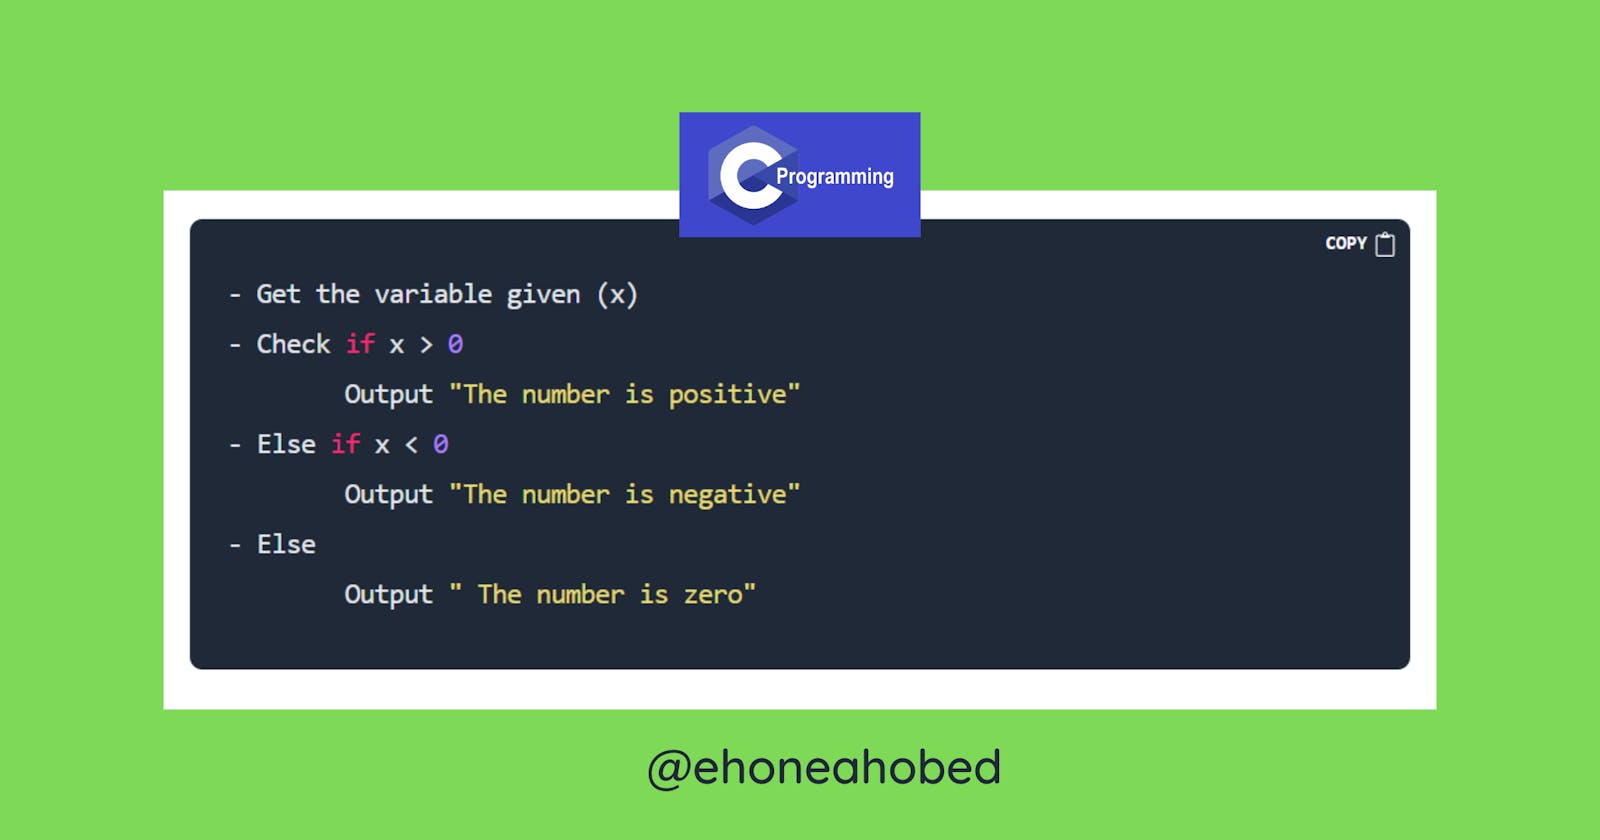 Write a C program that prints whether a given number is positive or negative